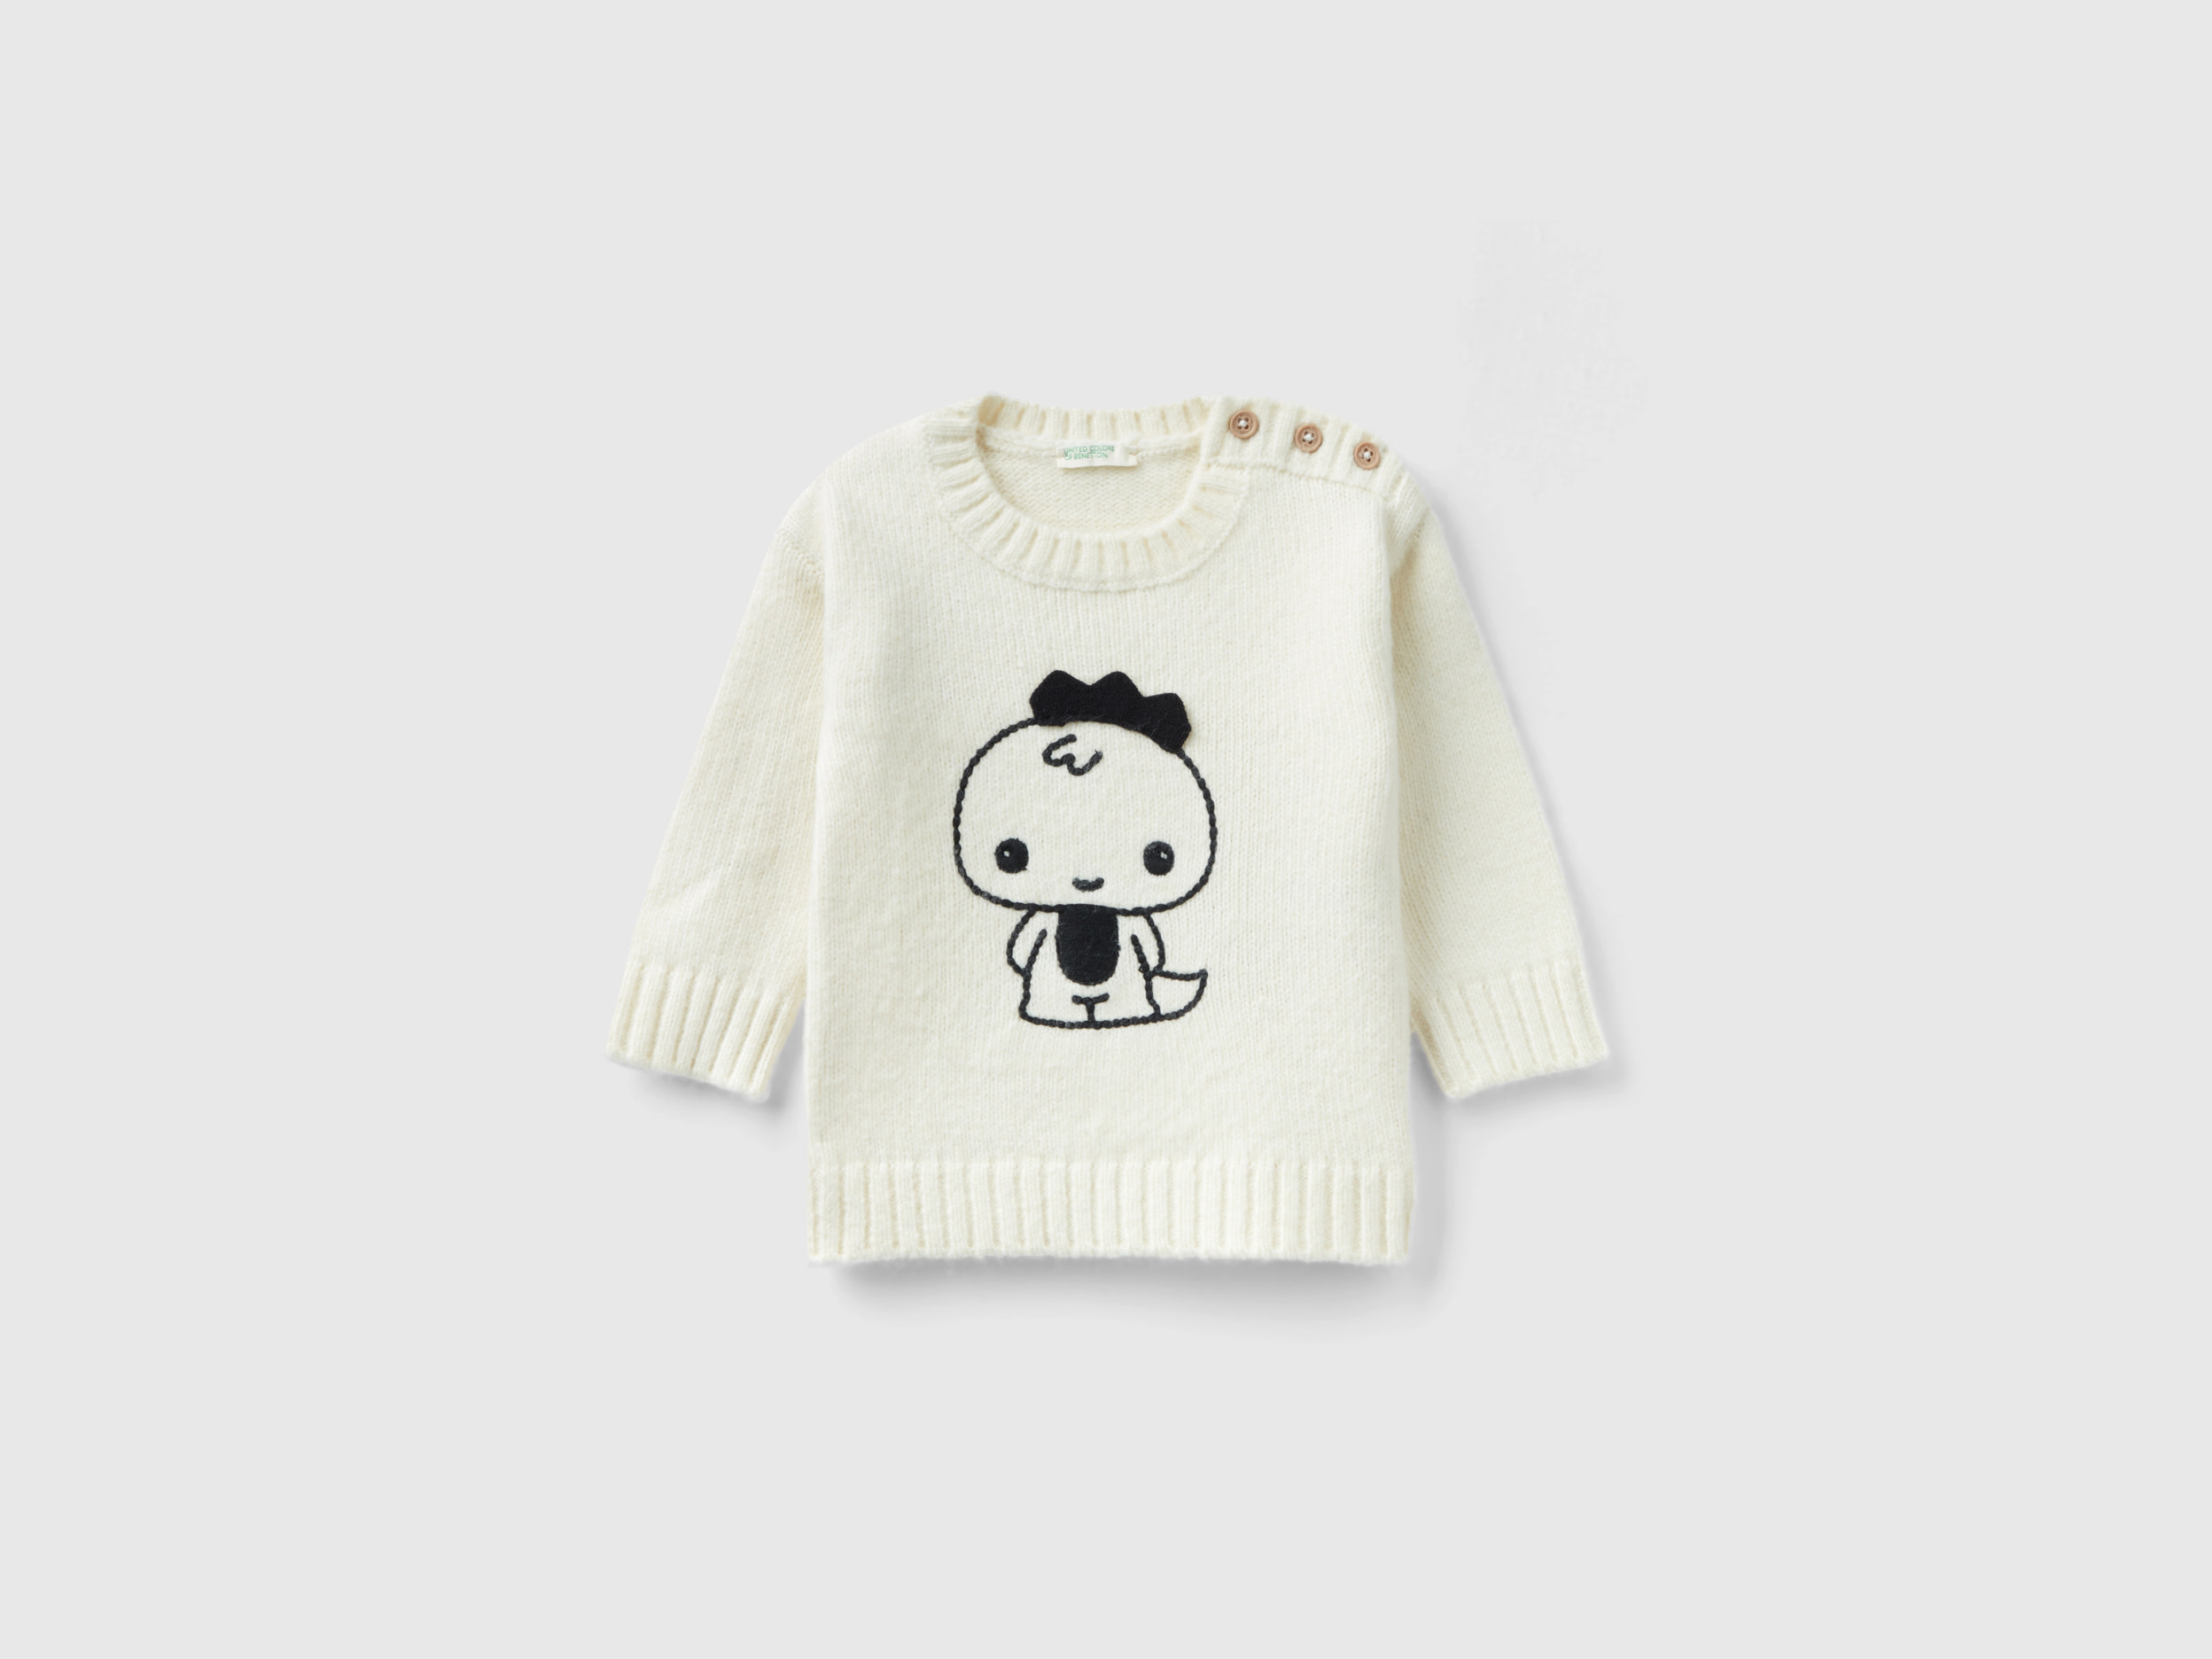 Benetton, Sweater With Embroidery And Applique, size 9-12, Creamy White, Kids